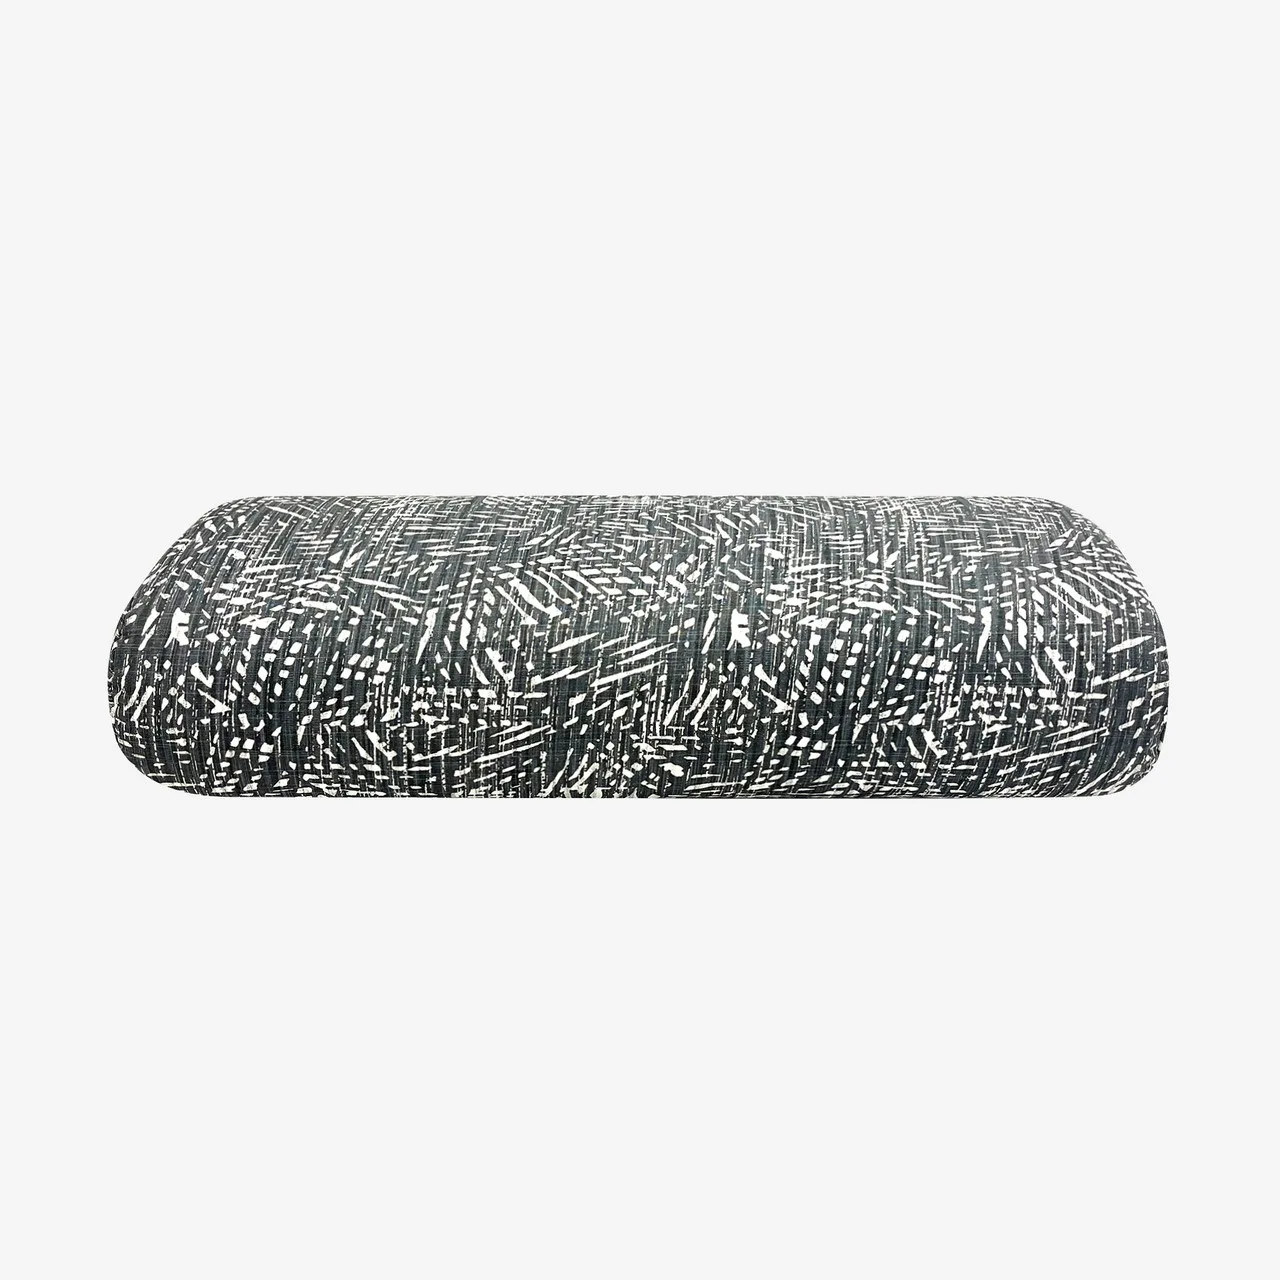 Everyday Yoga Bolster Rectangular Meditation Pillow, Super Soft &  Lightweight with Carry Handle - Firm Support for Restorative Yoga,  Multi-color